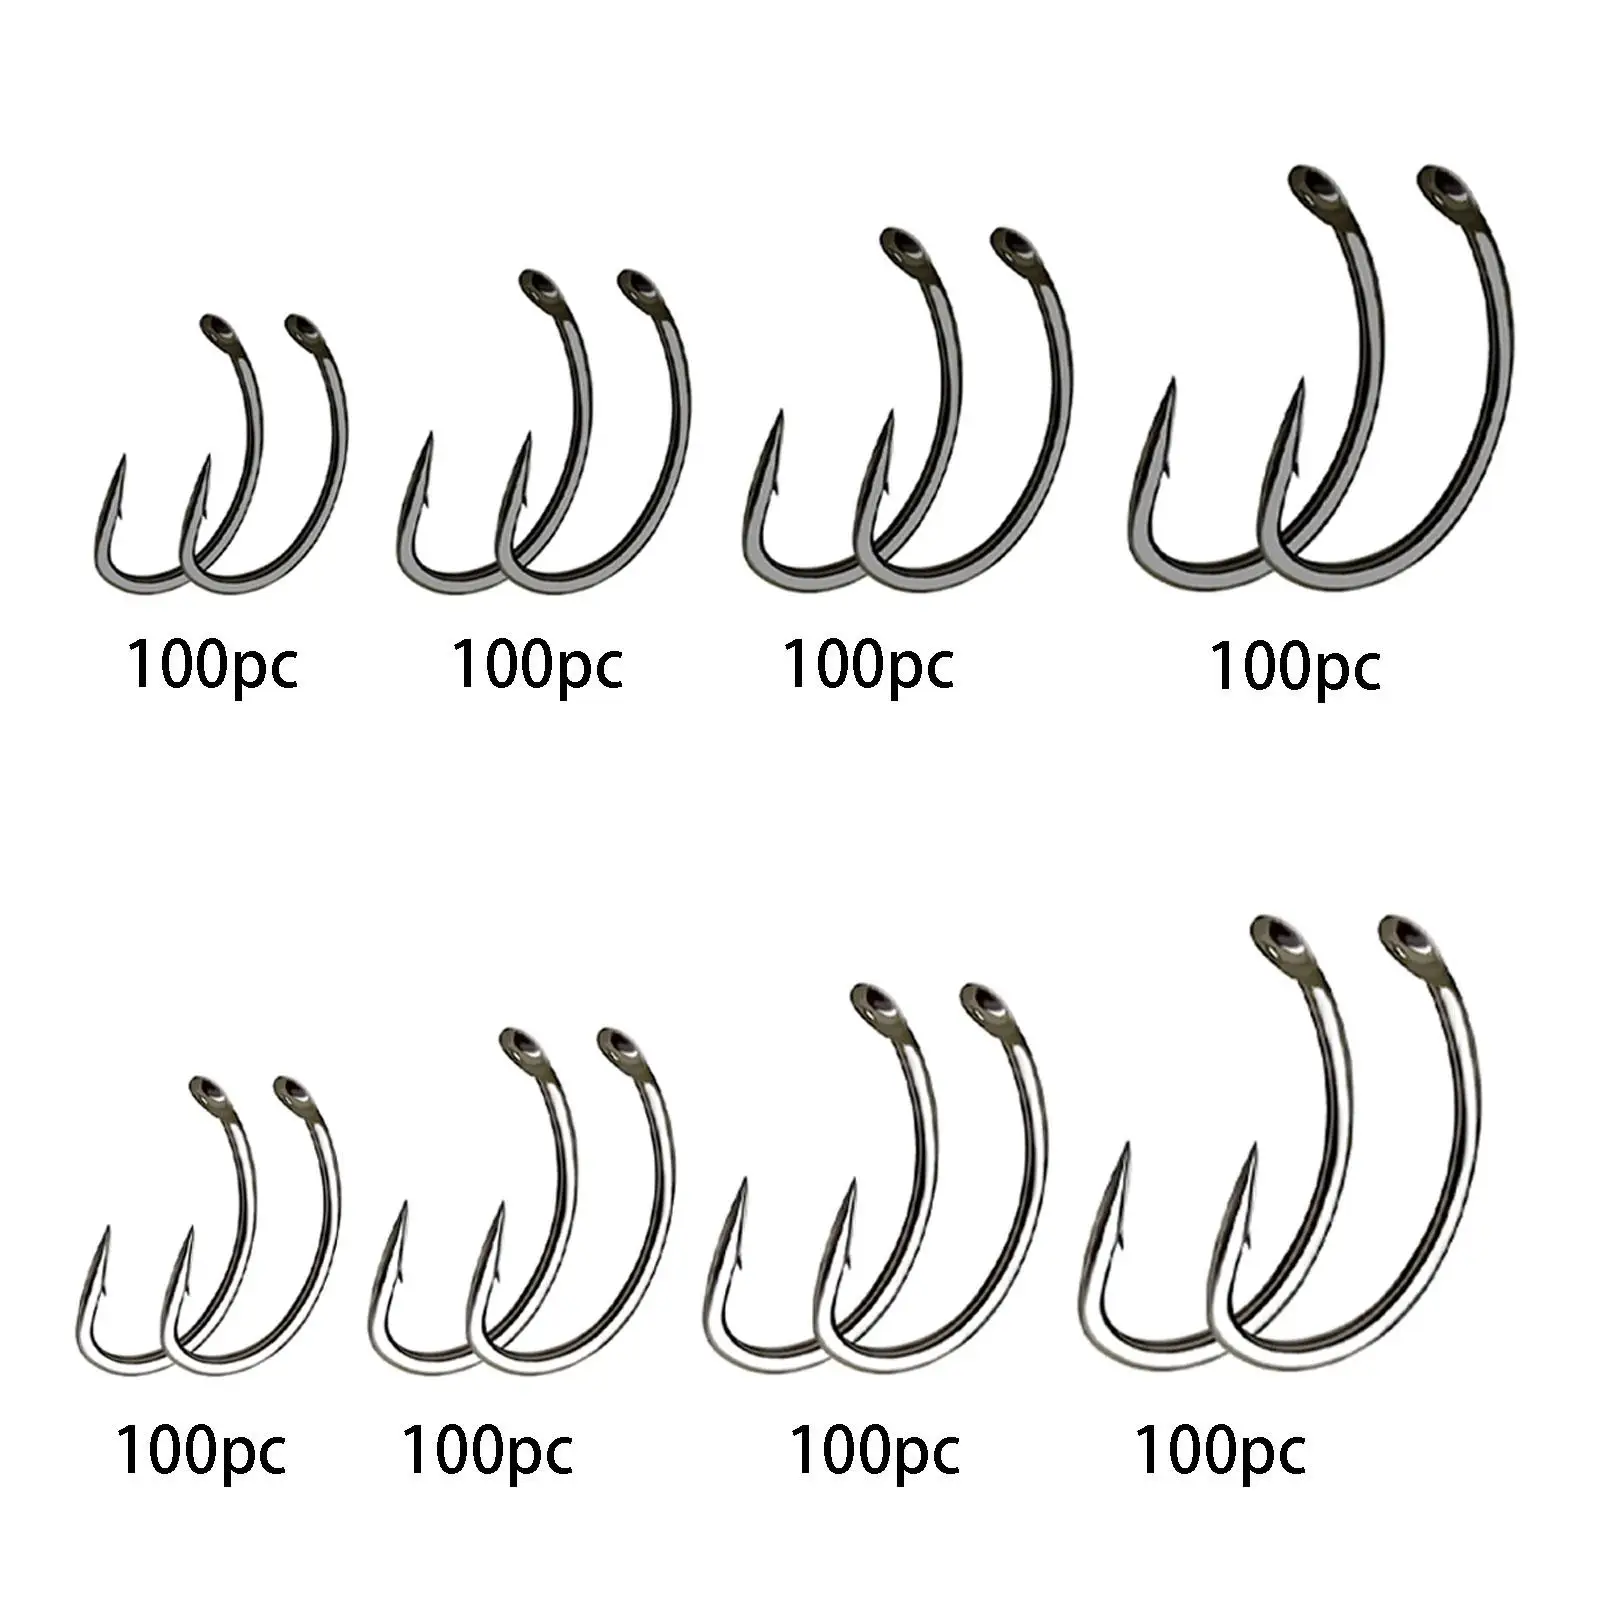 100Pcs Barb Curved Fly Fishing Hooks Gear for Fishing Lures Fly Tying Hooks